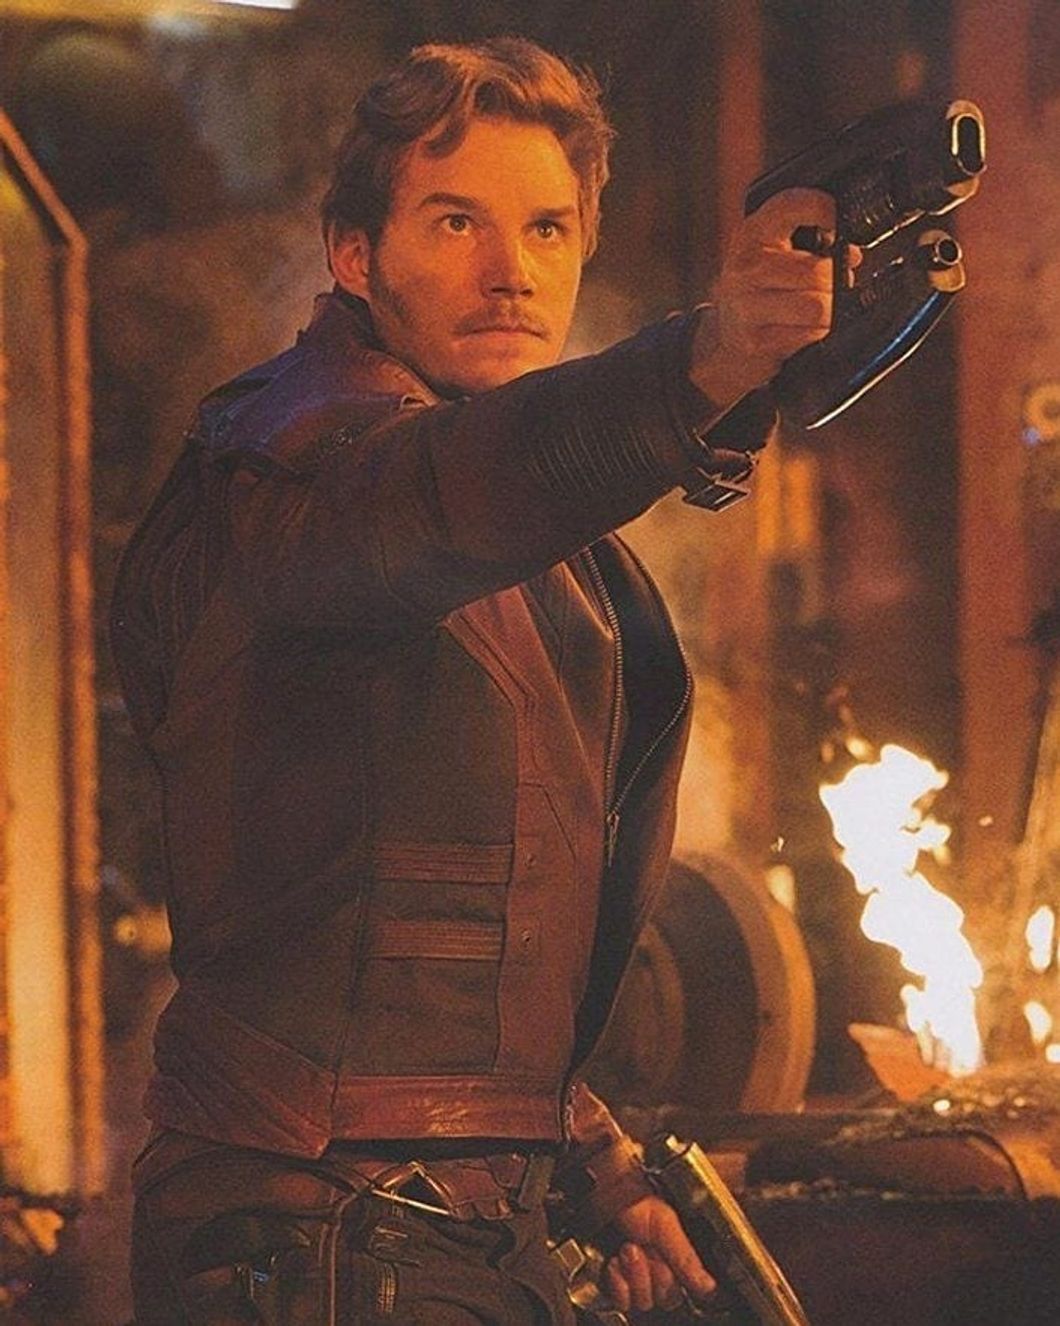 10 Songs Peter Quill Would Totally Jam To